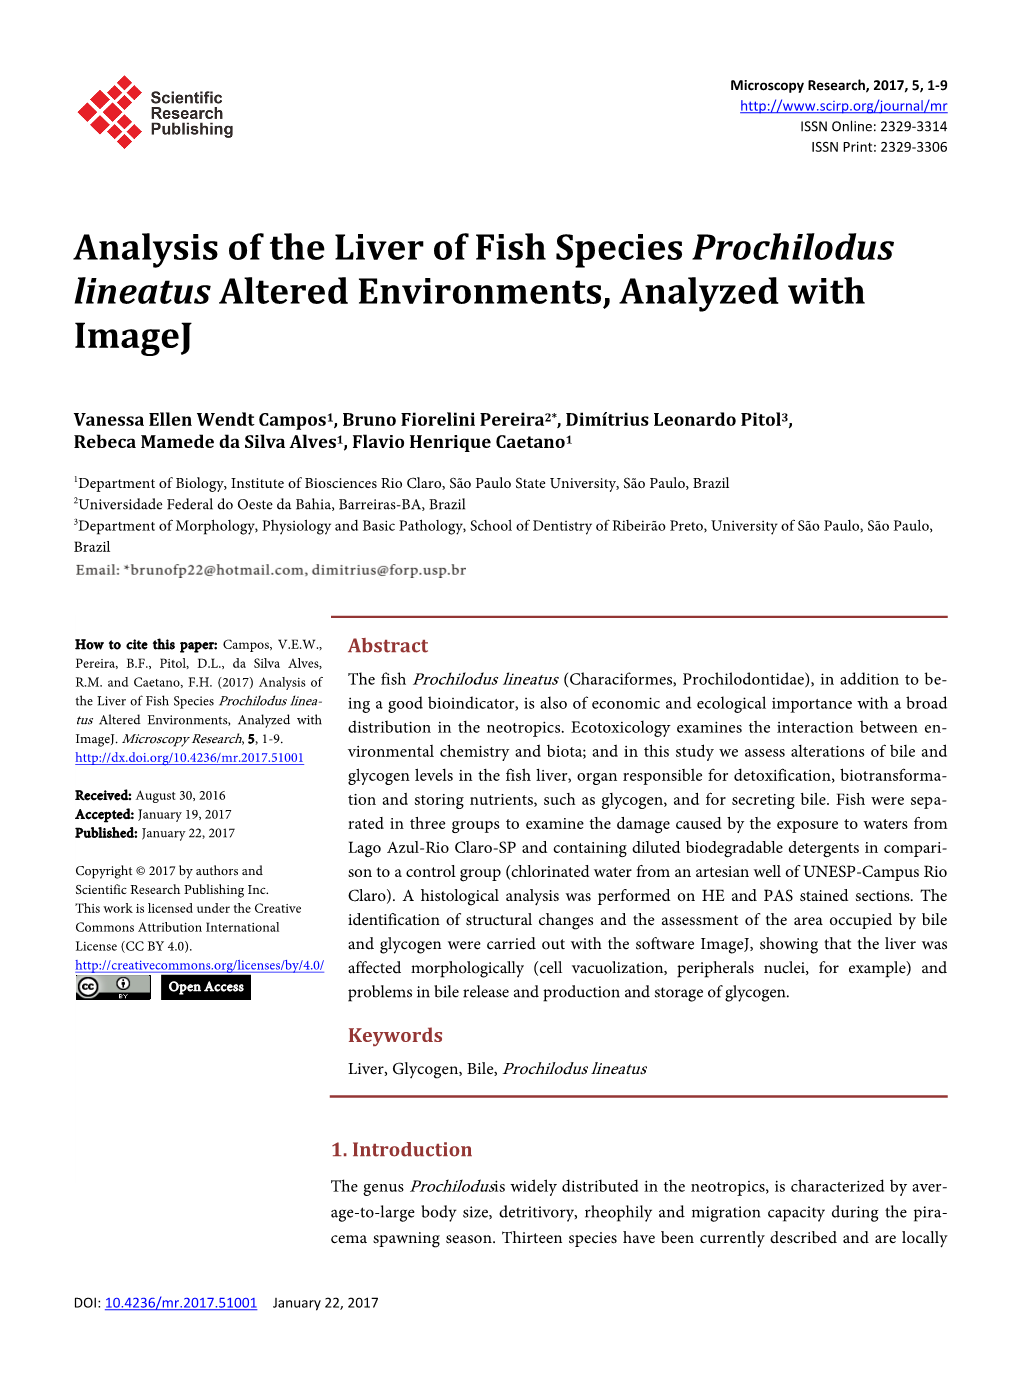 Analysis of the Liver of Fish Species Prochilodus Lineatus Altered Environments, Analyzed with Imagej